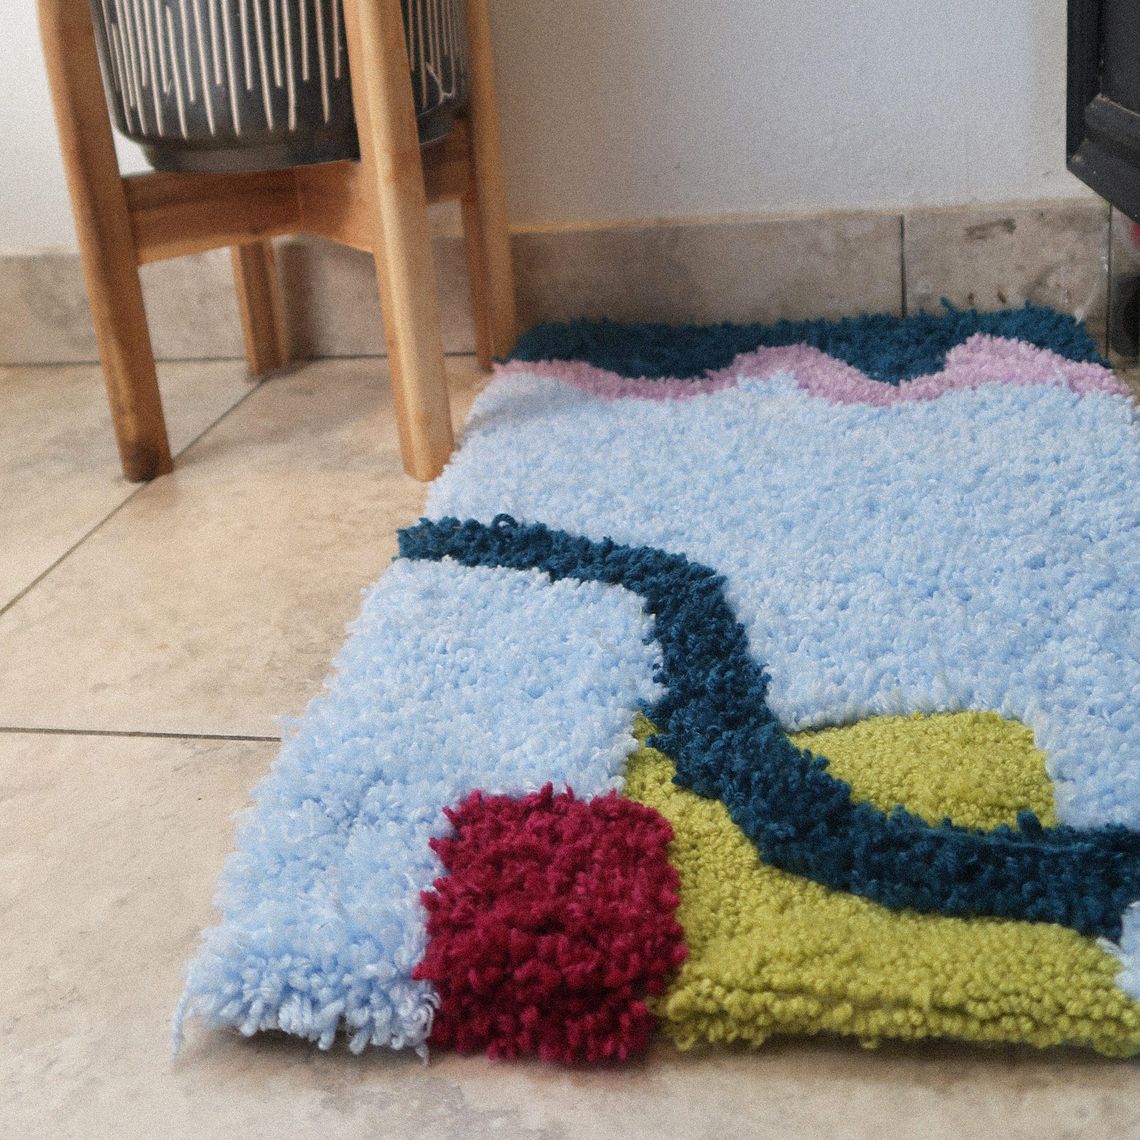 Rug Tufting The Tiktok Design Trend Of, Really Cool Rugs